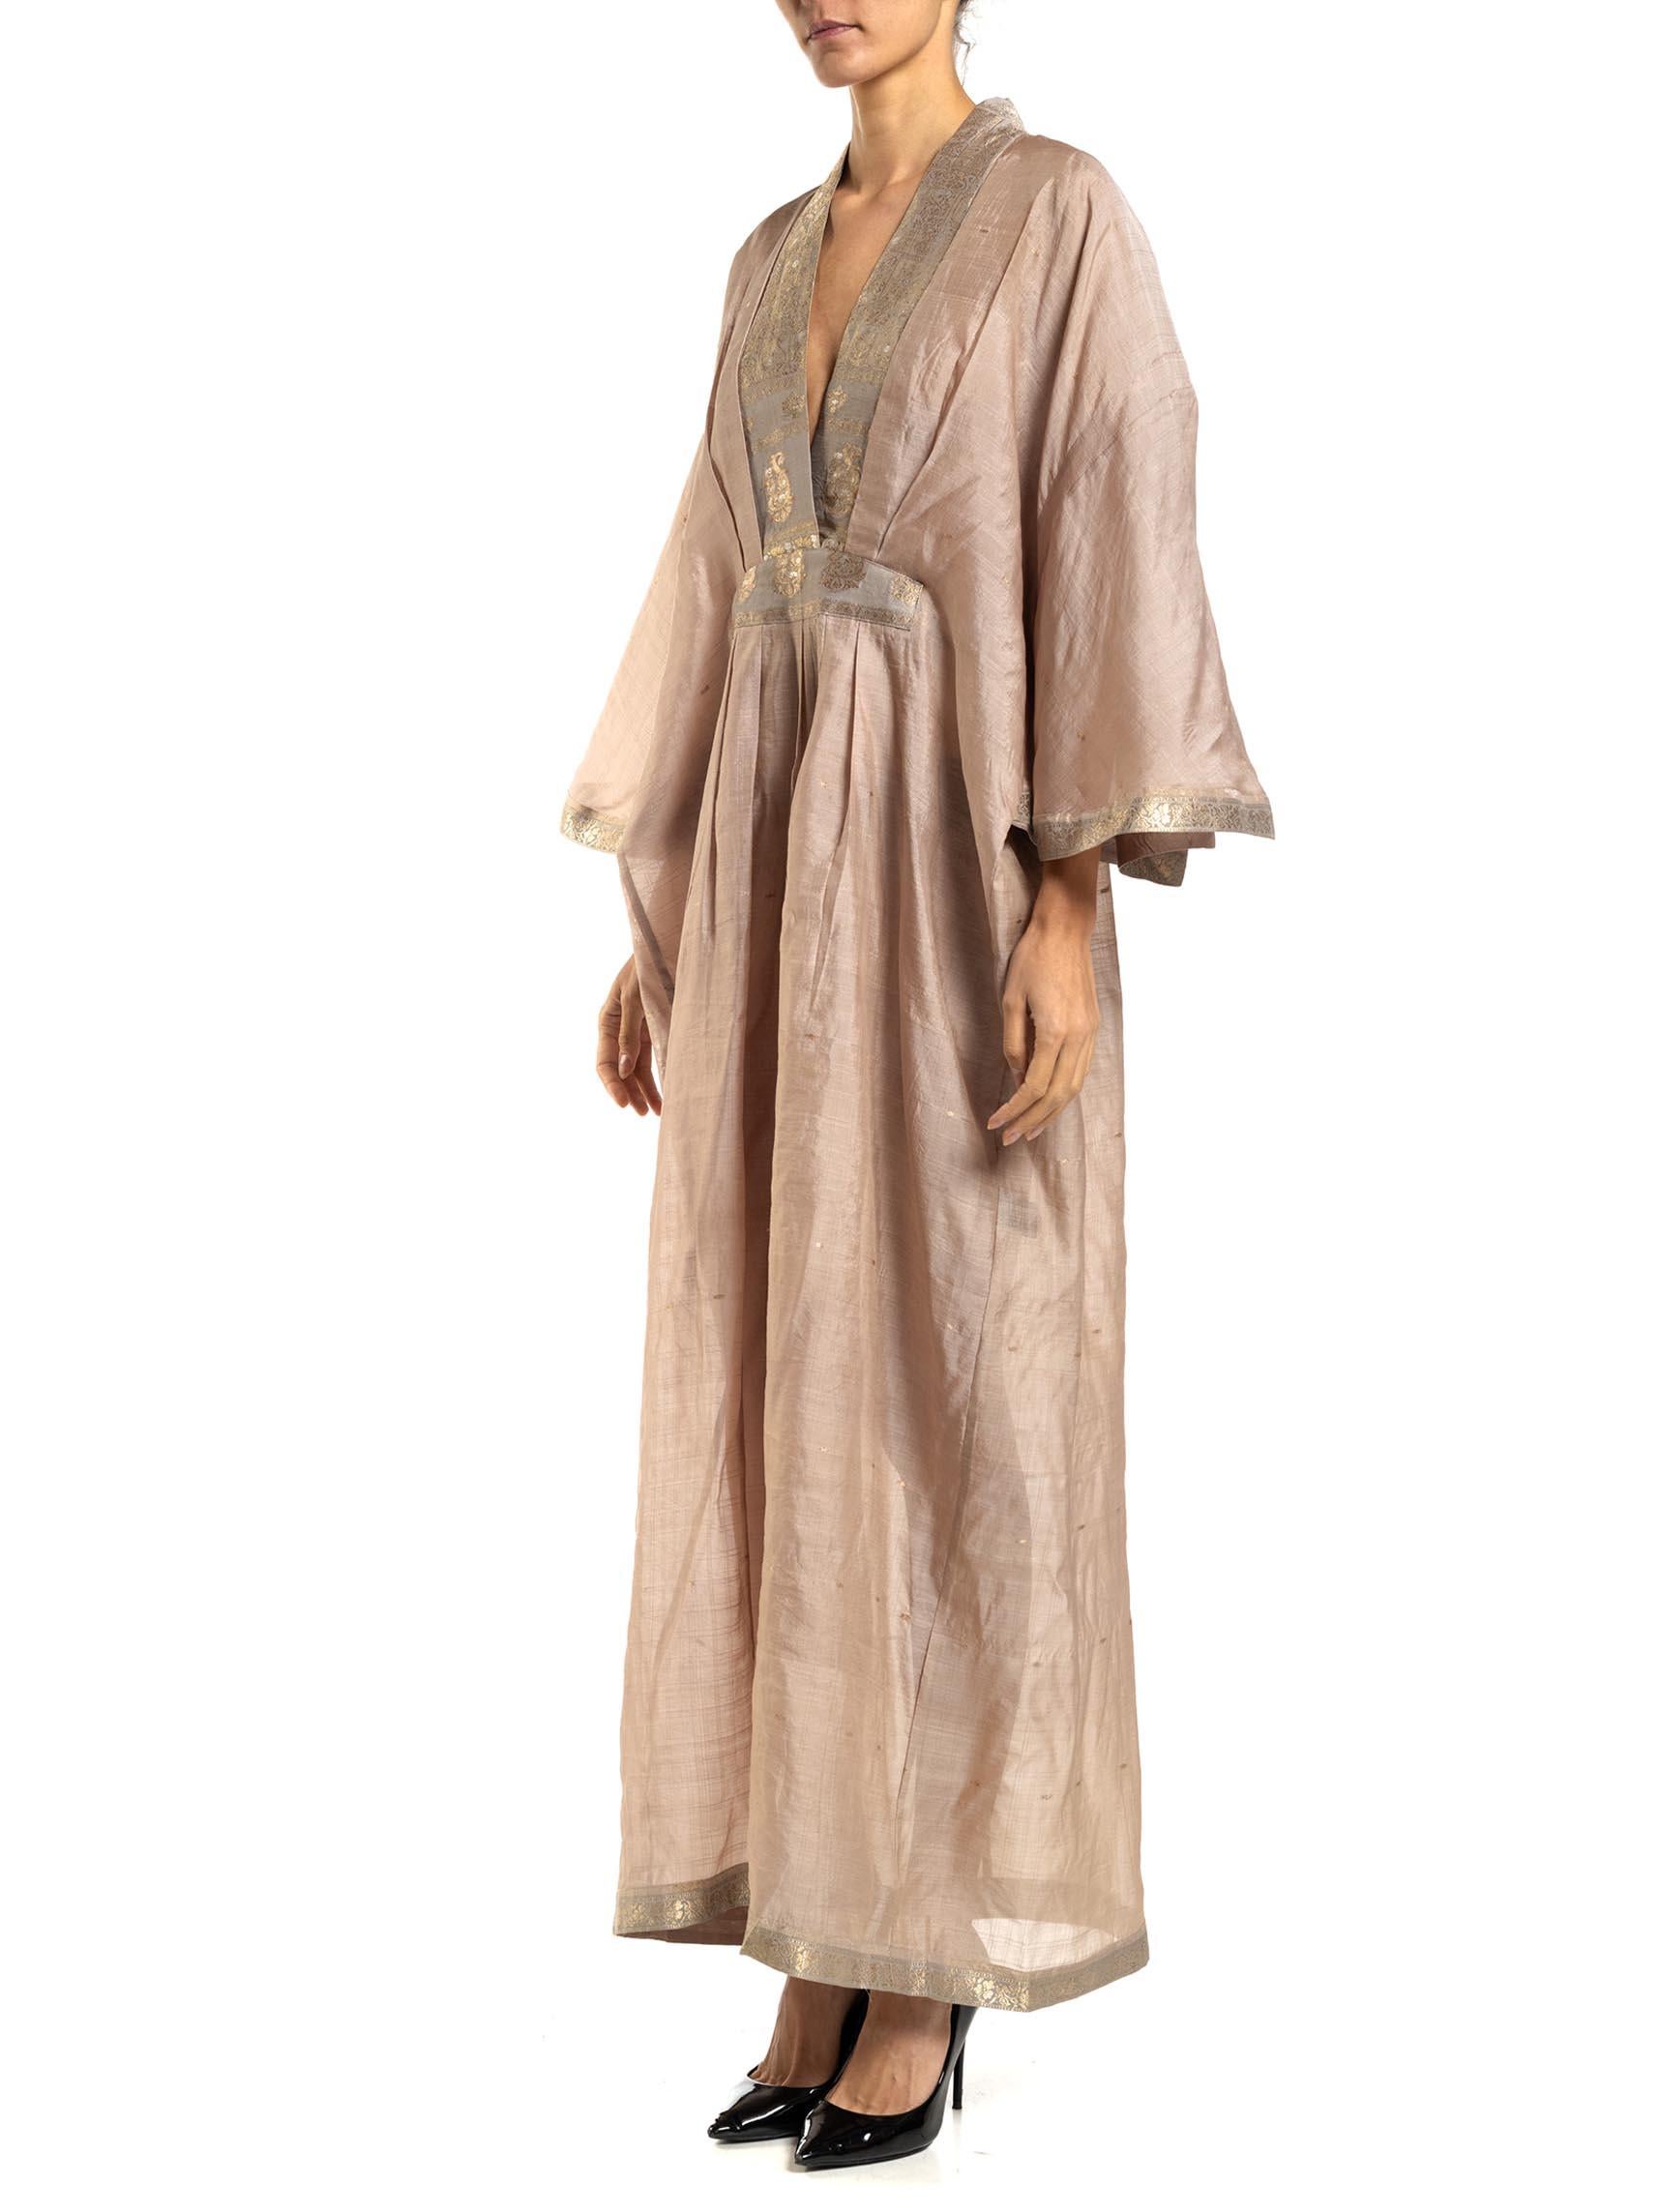 MORPHEW COLLECTION Dusty Pink Silk Kaftan Made From Vintage Sari For Sale 3